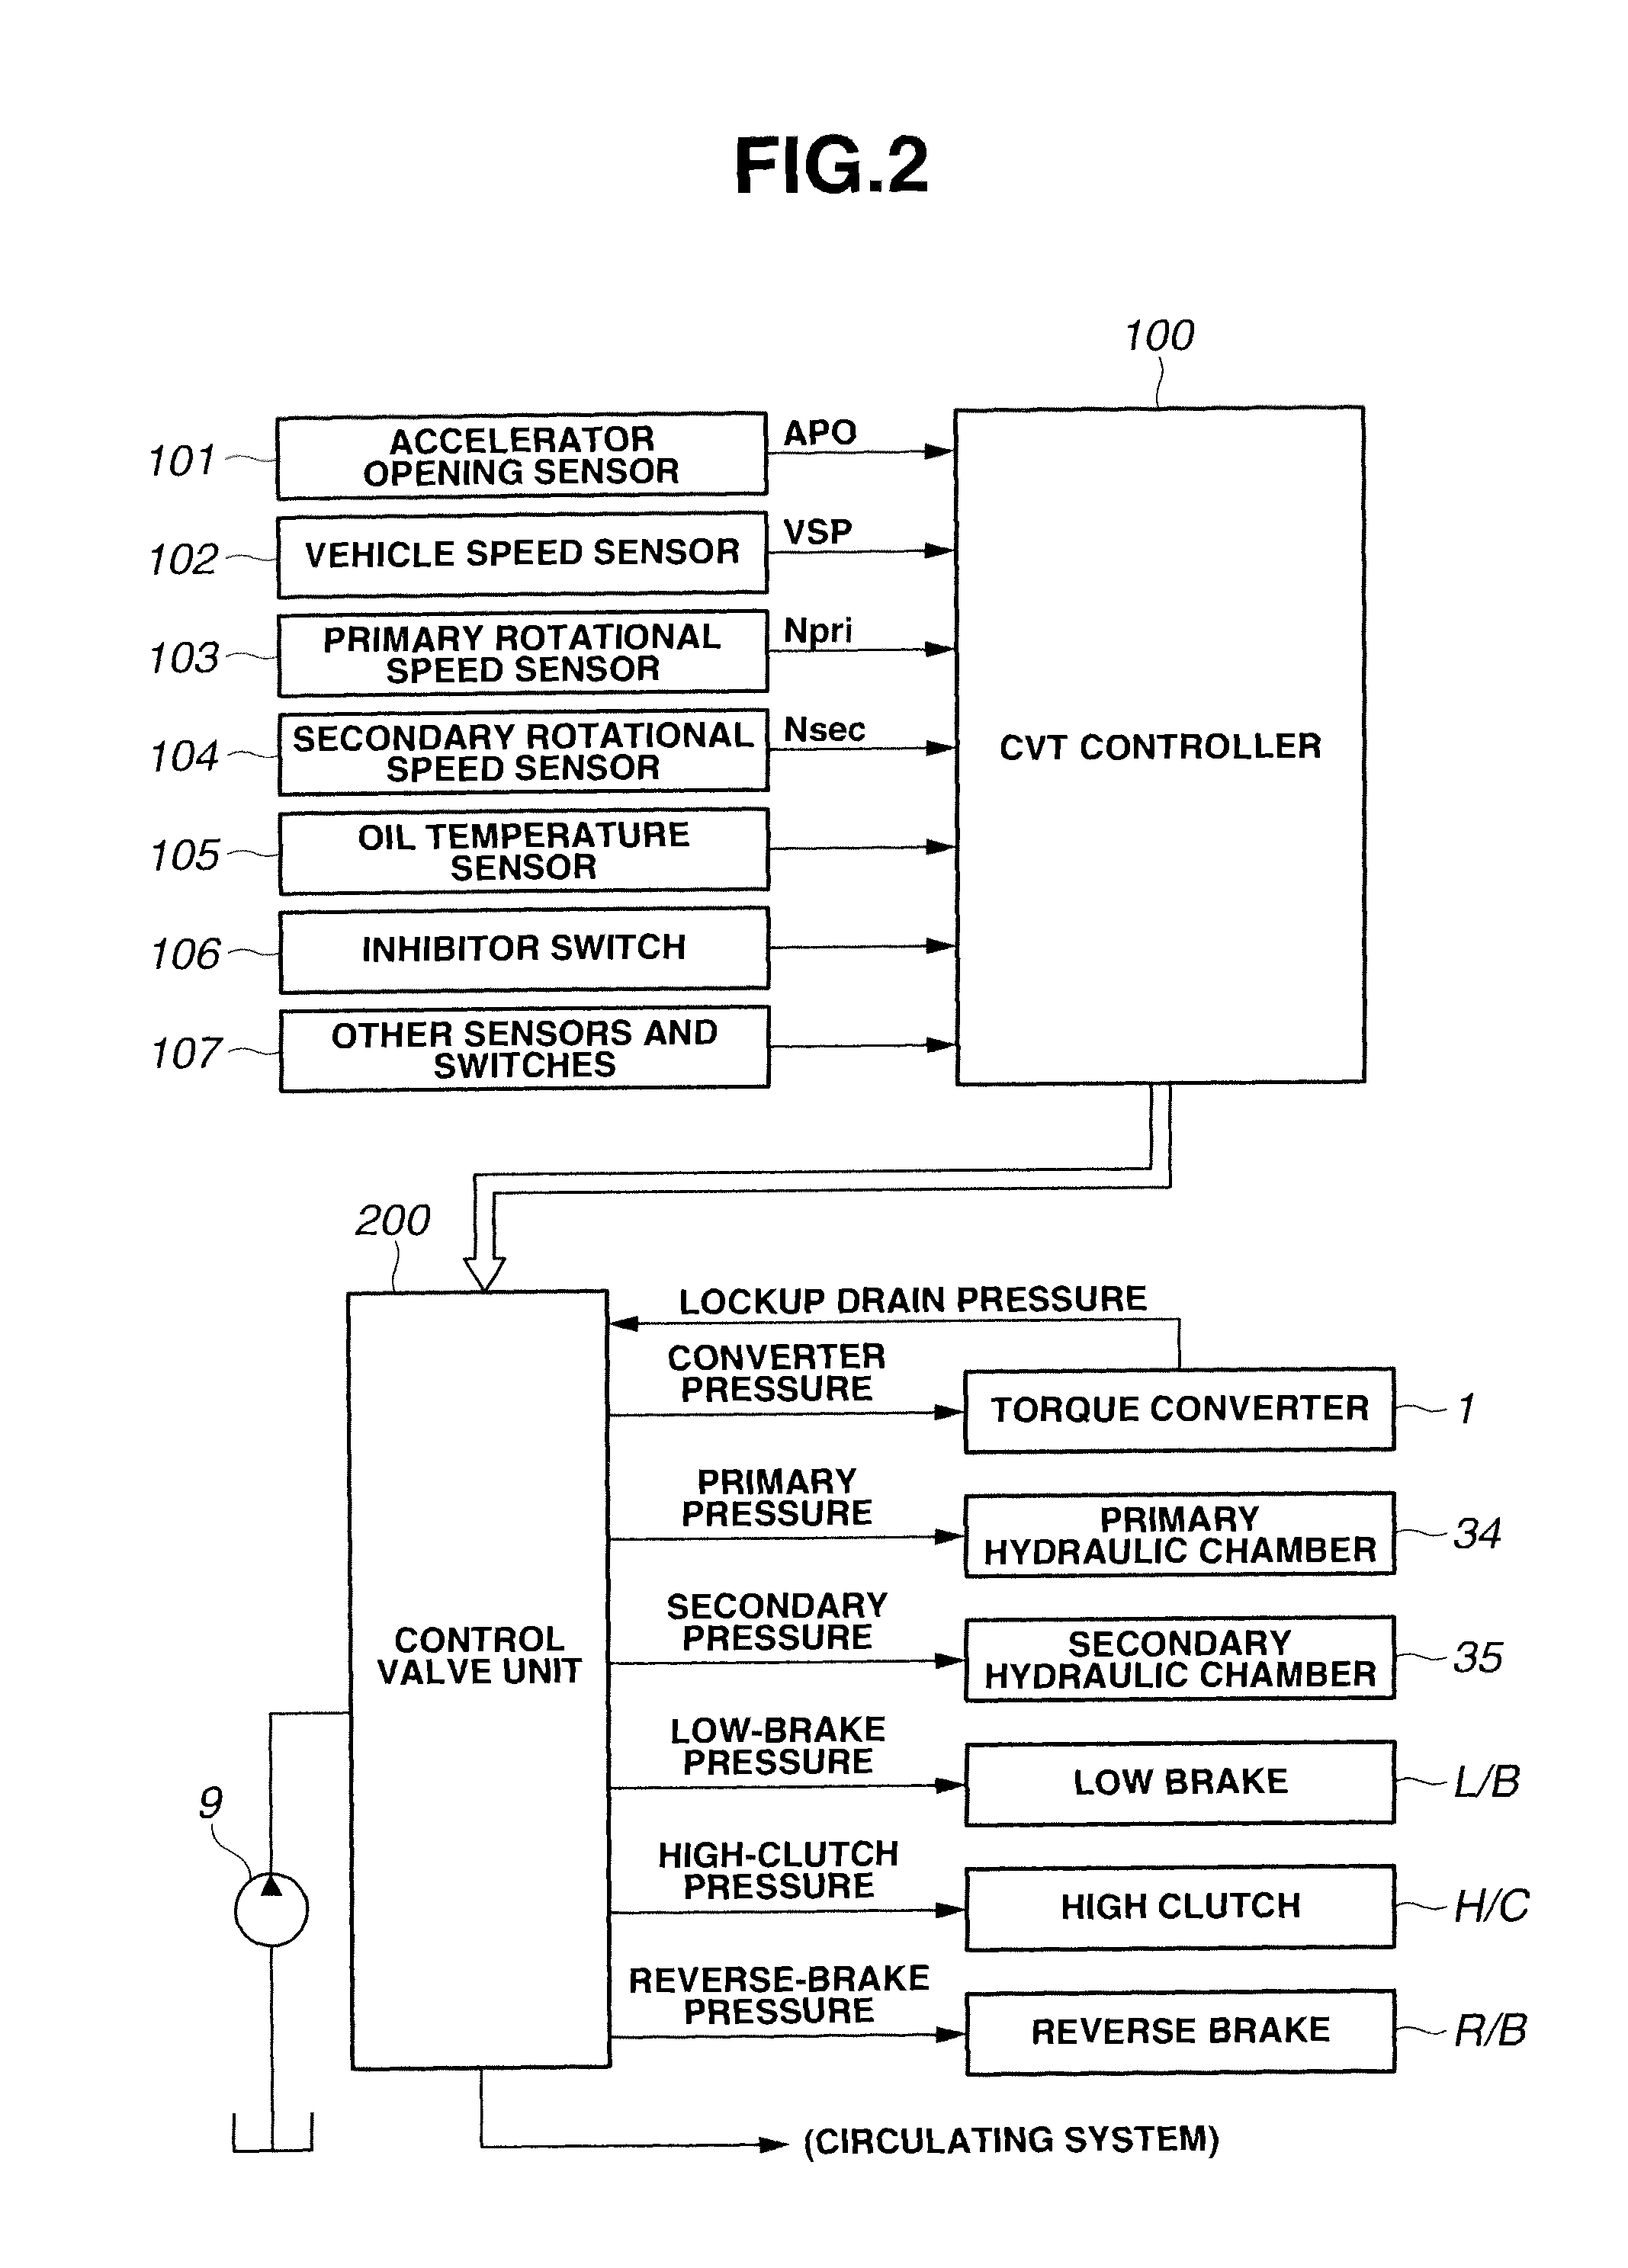 Continuously-variable transmission for vehicle